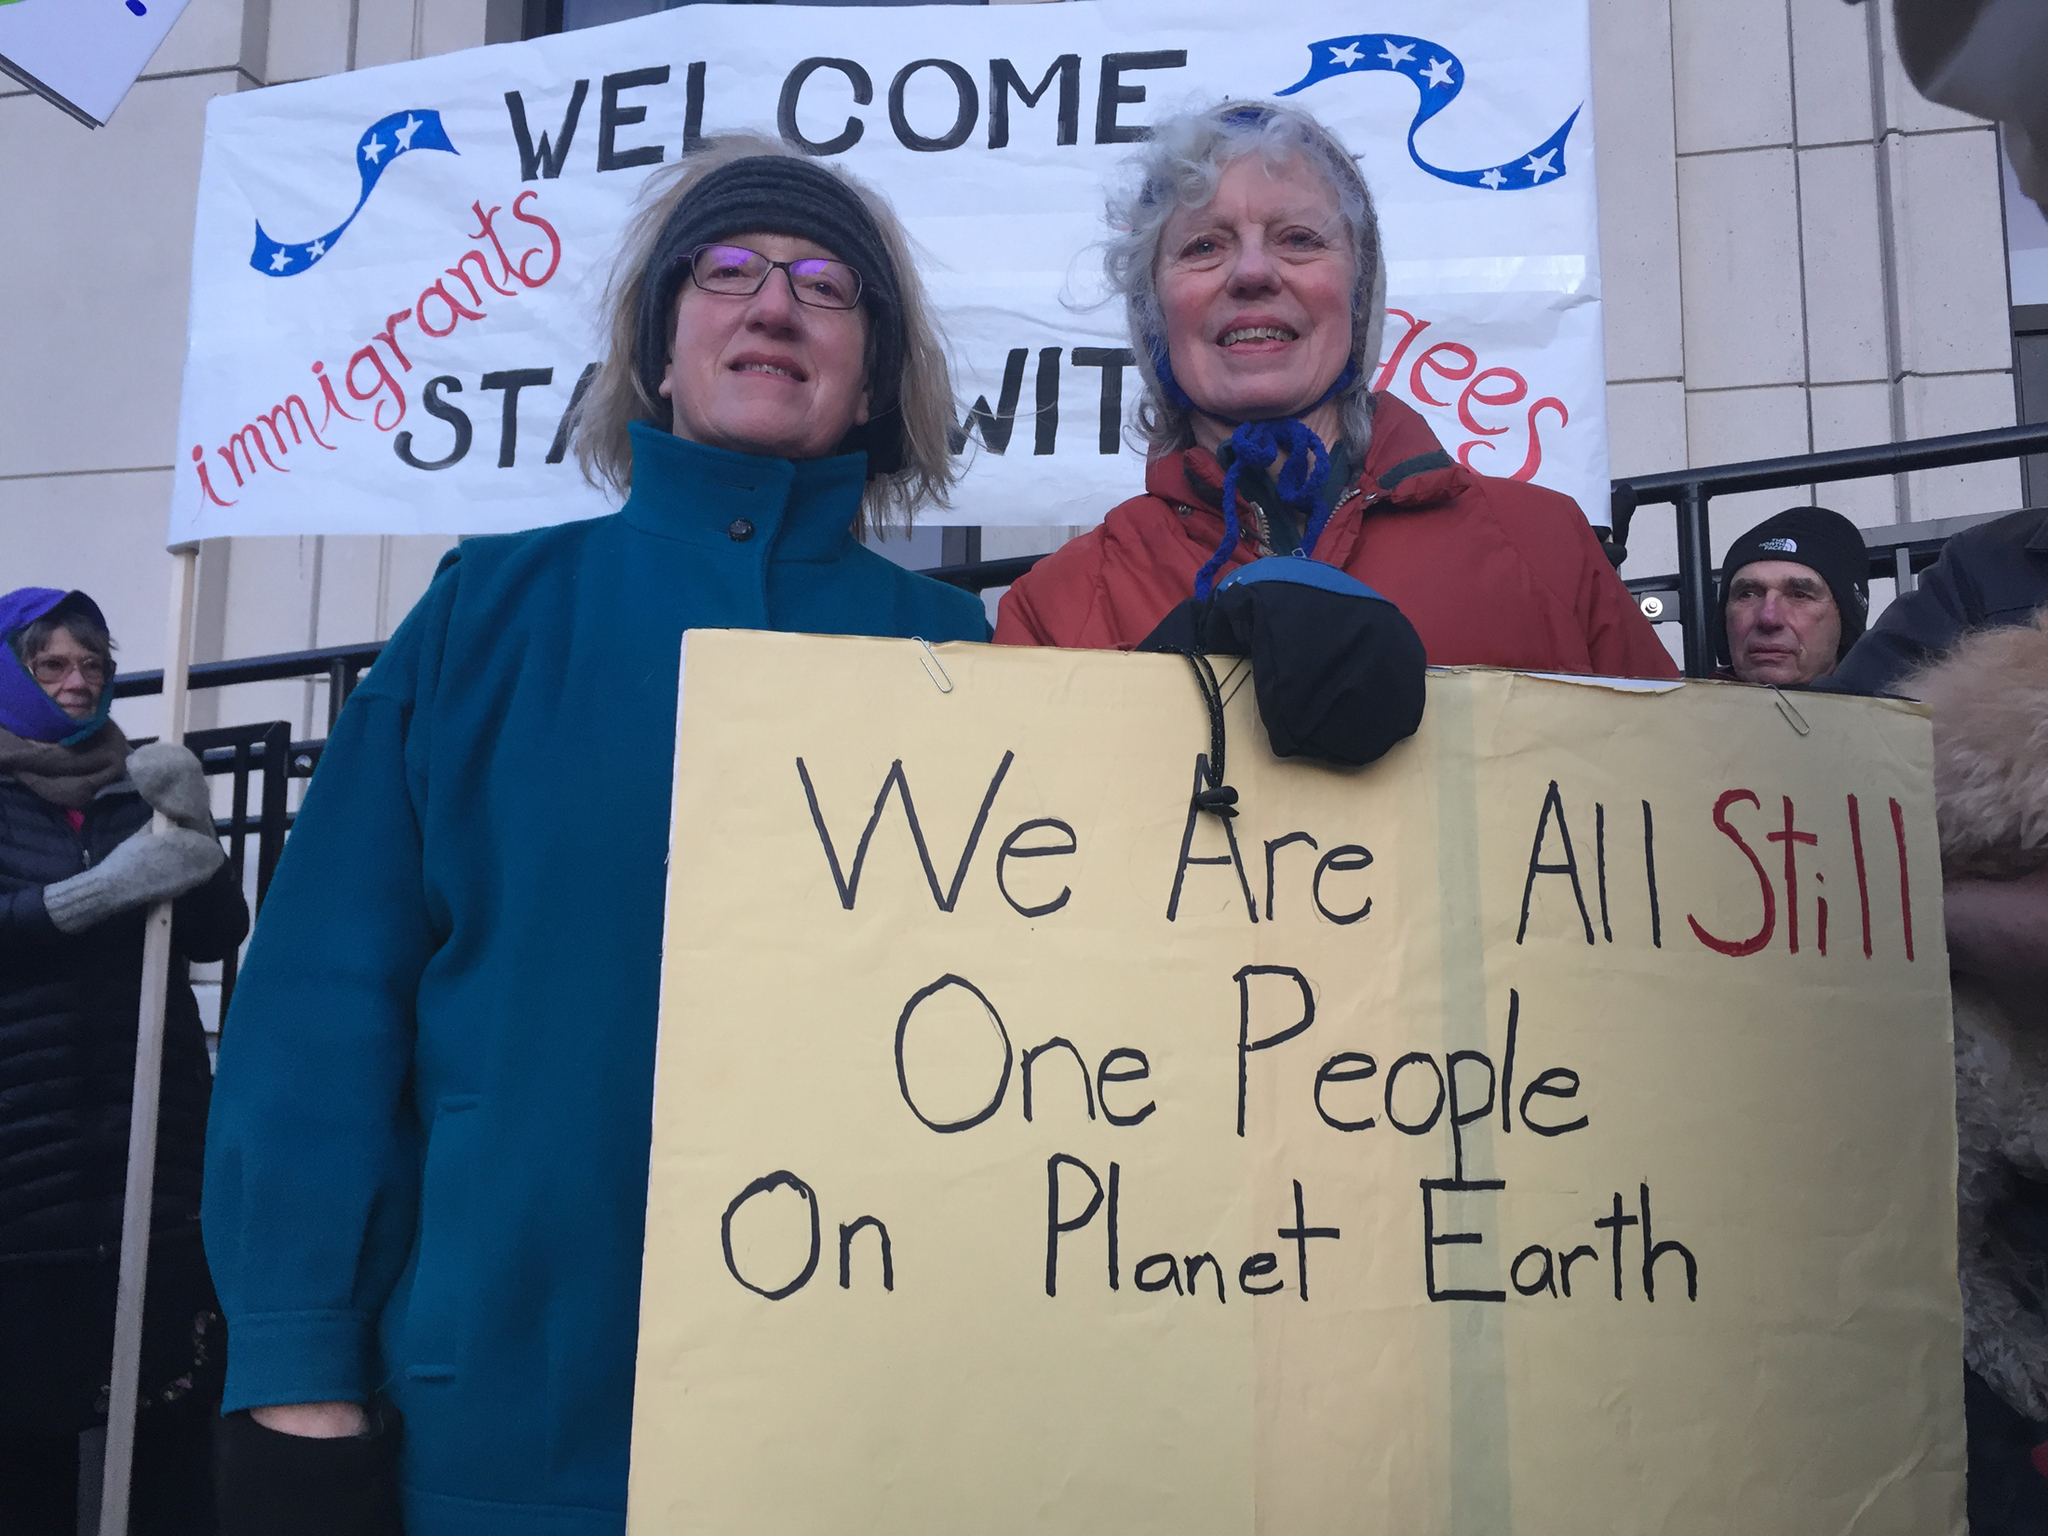 From left, Cathy Botelho and Judith Maier at the “Stand with Refugees and Immigrants” event Monday morning. This was the second gathering organized in front of the Alaska State Capitol, aimed both at showing support for refugees and immigrants and thanking Alaskan legislators who have spoken out against President Donald Trump’s executive order. (Mary Catharine Martin | Juneau Empire)